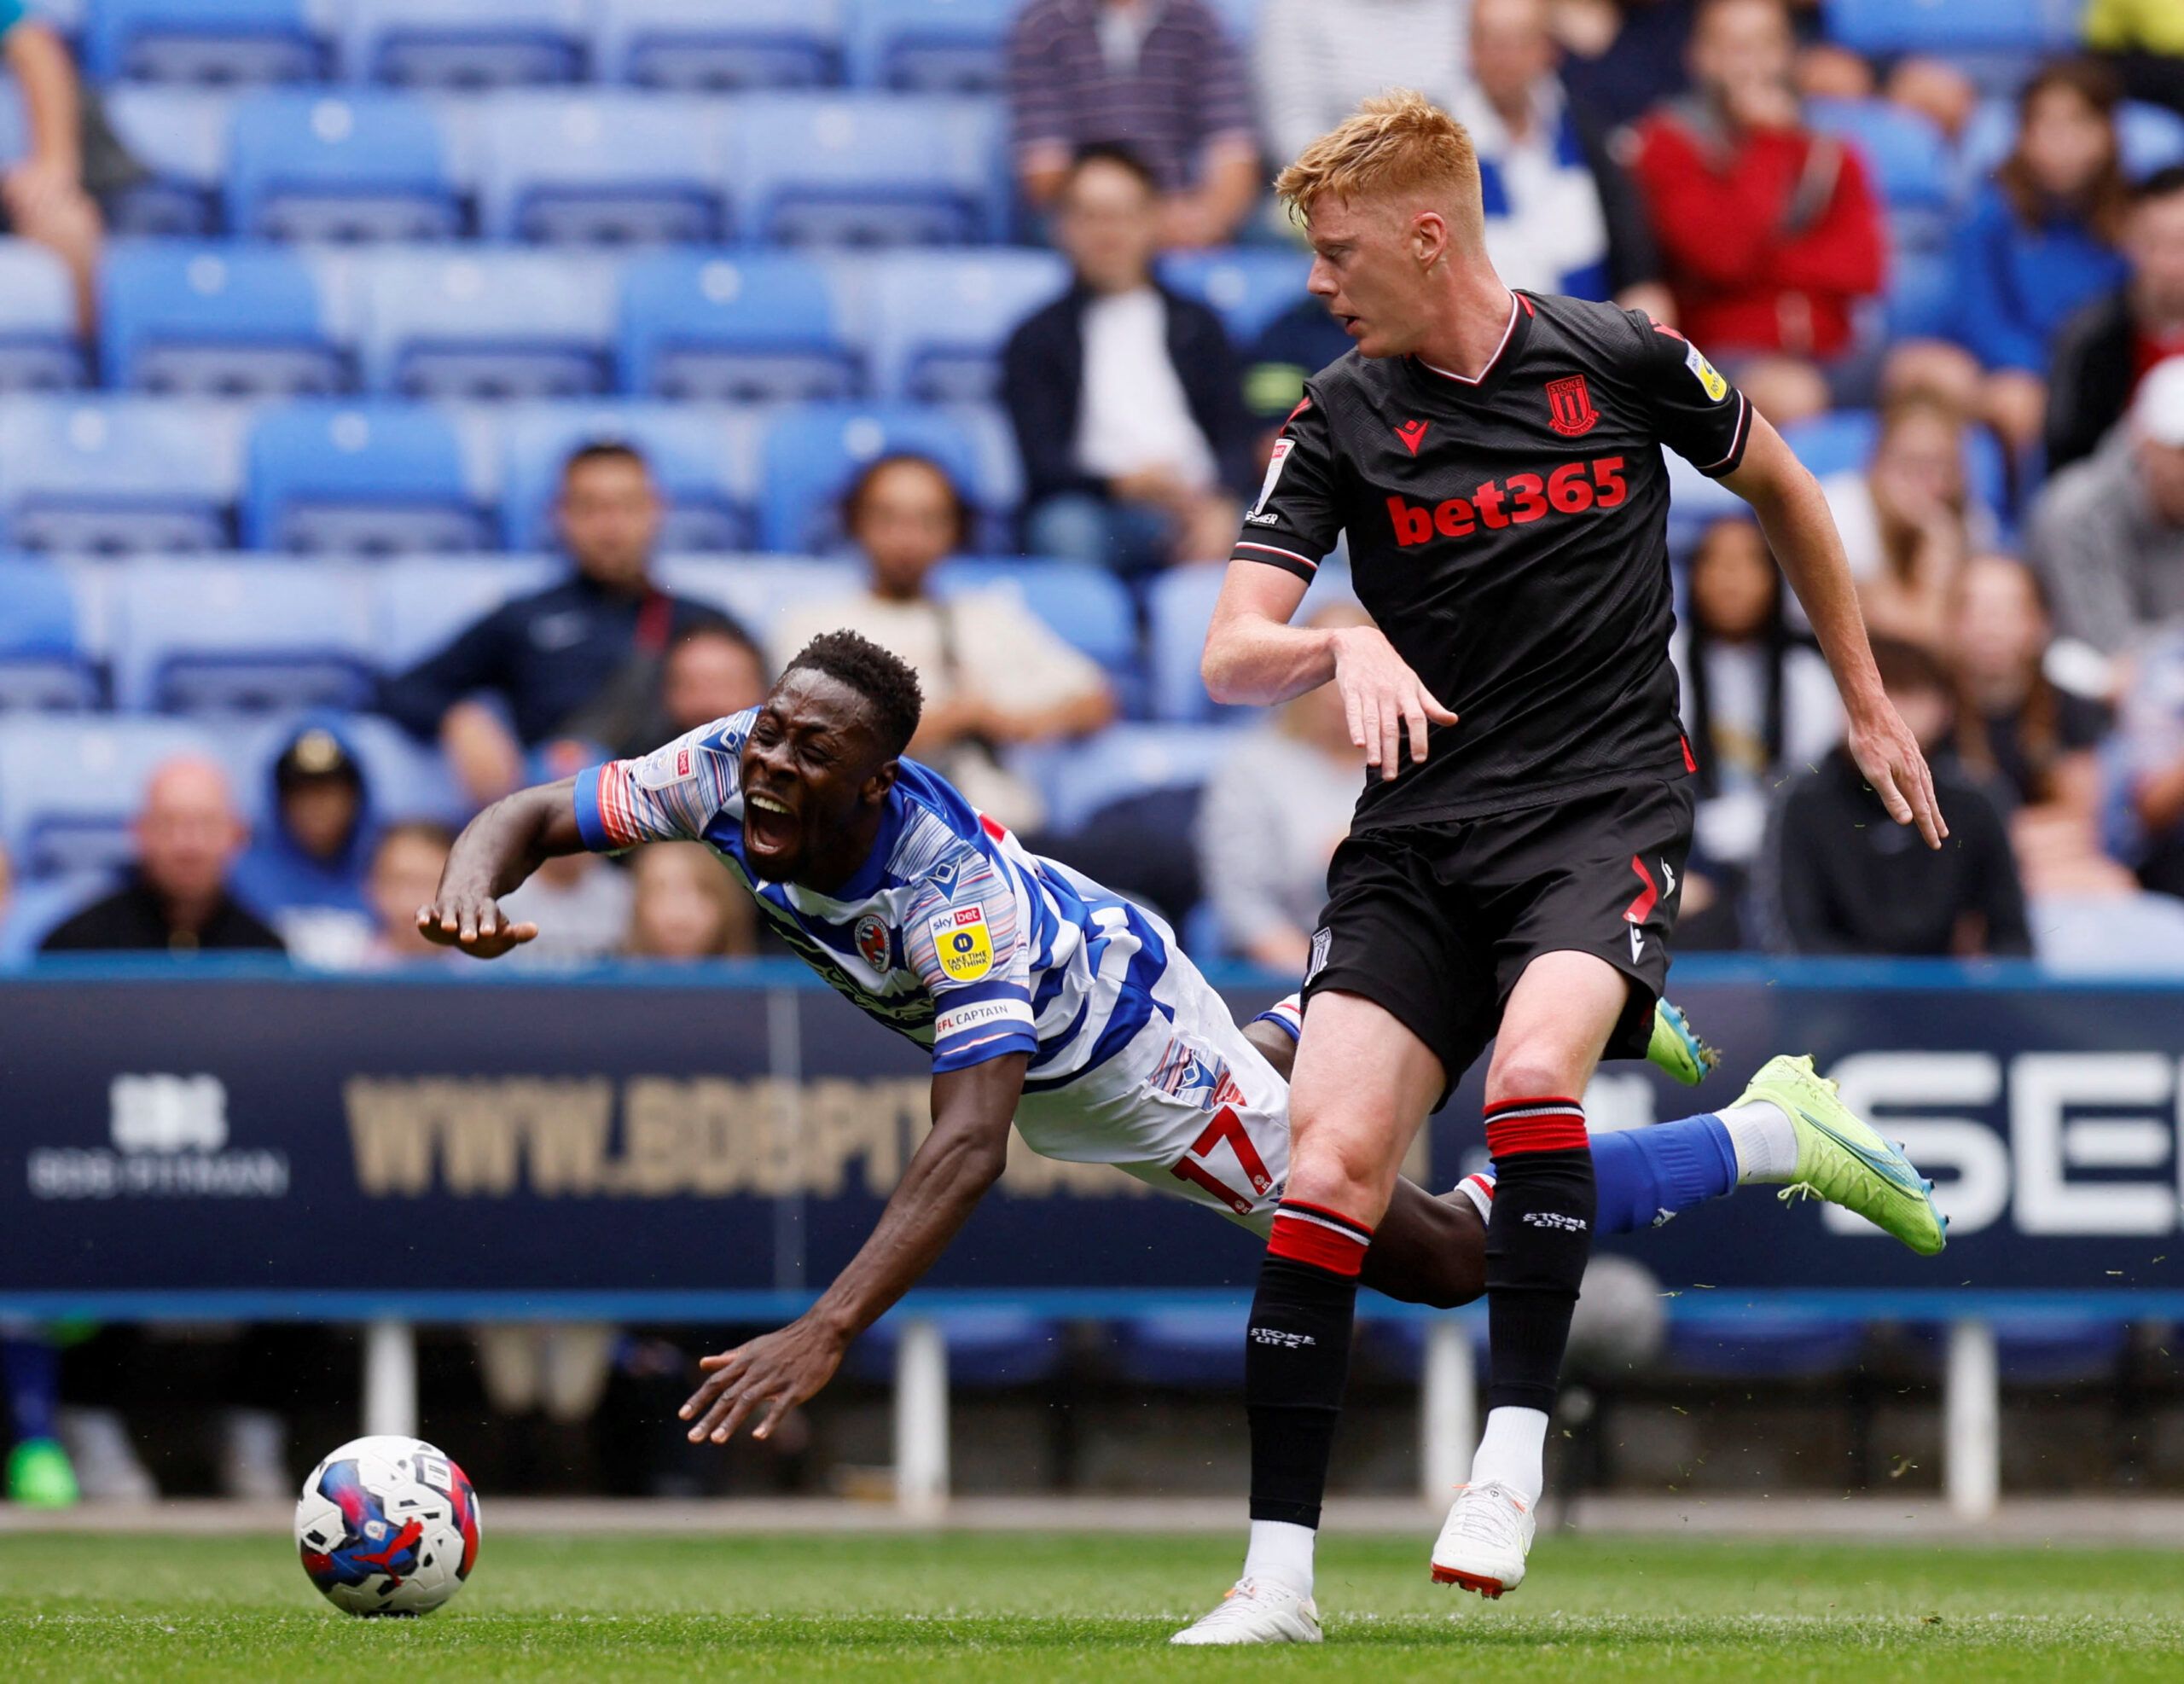 Soccer Football - Championship - Reading v Stoke City - Madejski Stadium, Reading, Britain - September 4, 2022 Reading?s Andy Yiadom In action with Stoke City's Sam Clucas  Action Images/Andrew Couldridge  EDITORIAL USE ONLY. No use with unauthorized audio, video, data, fixture lists, club/league logos or 